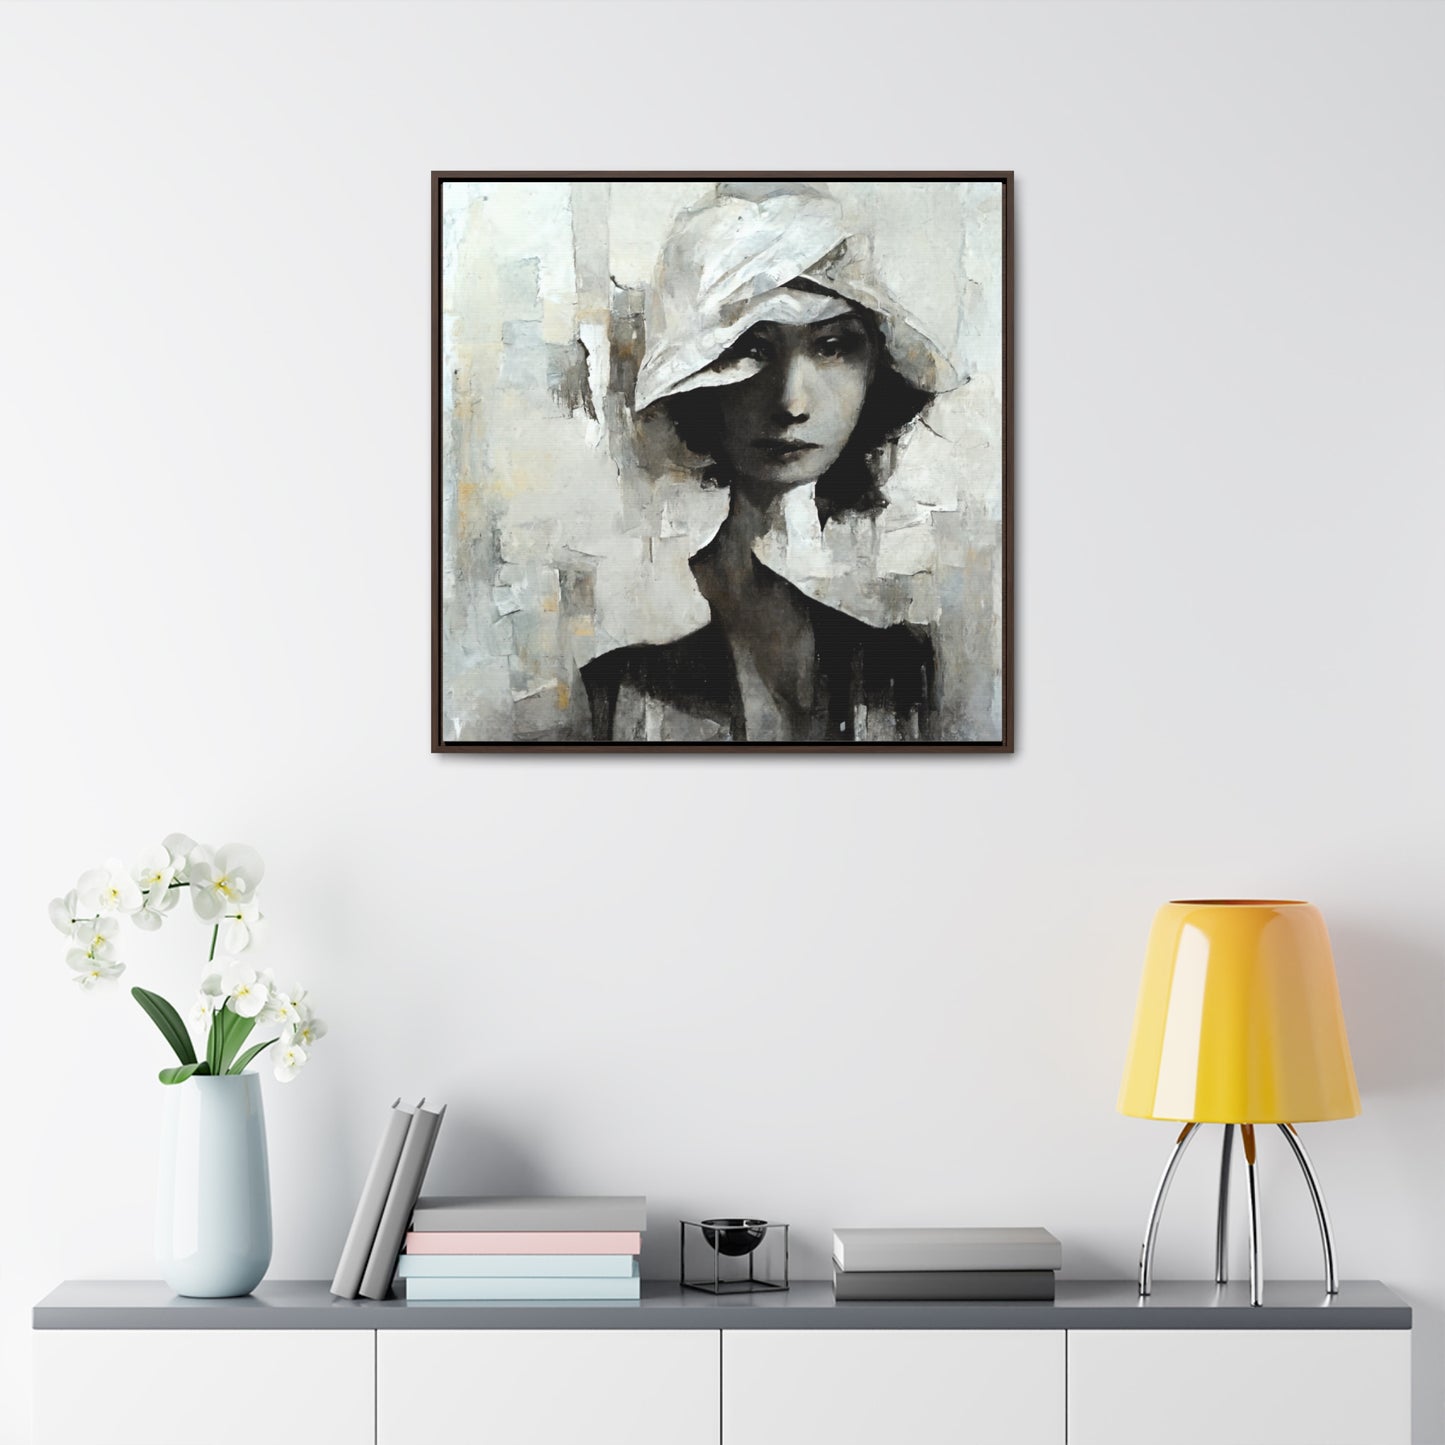 Forgotten face, Valentinii, Gallery Canvas Wraps, Square Frame